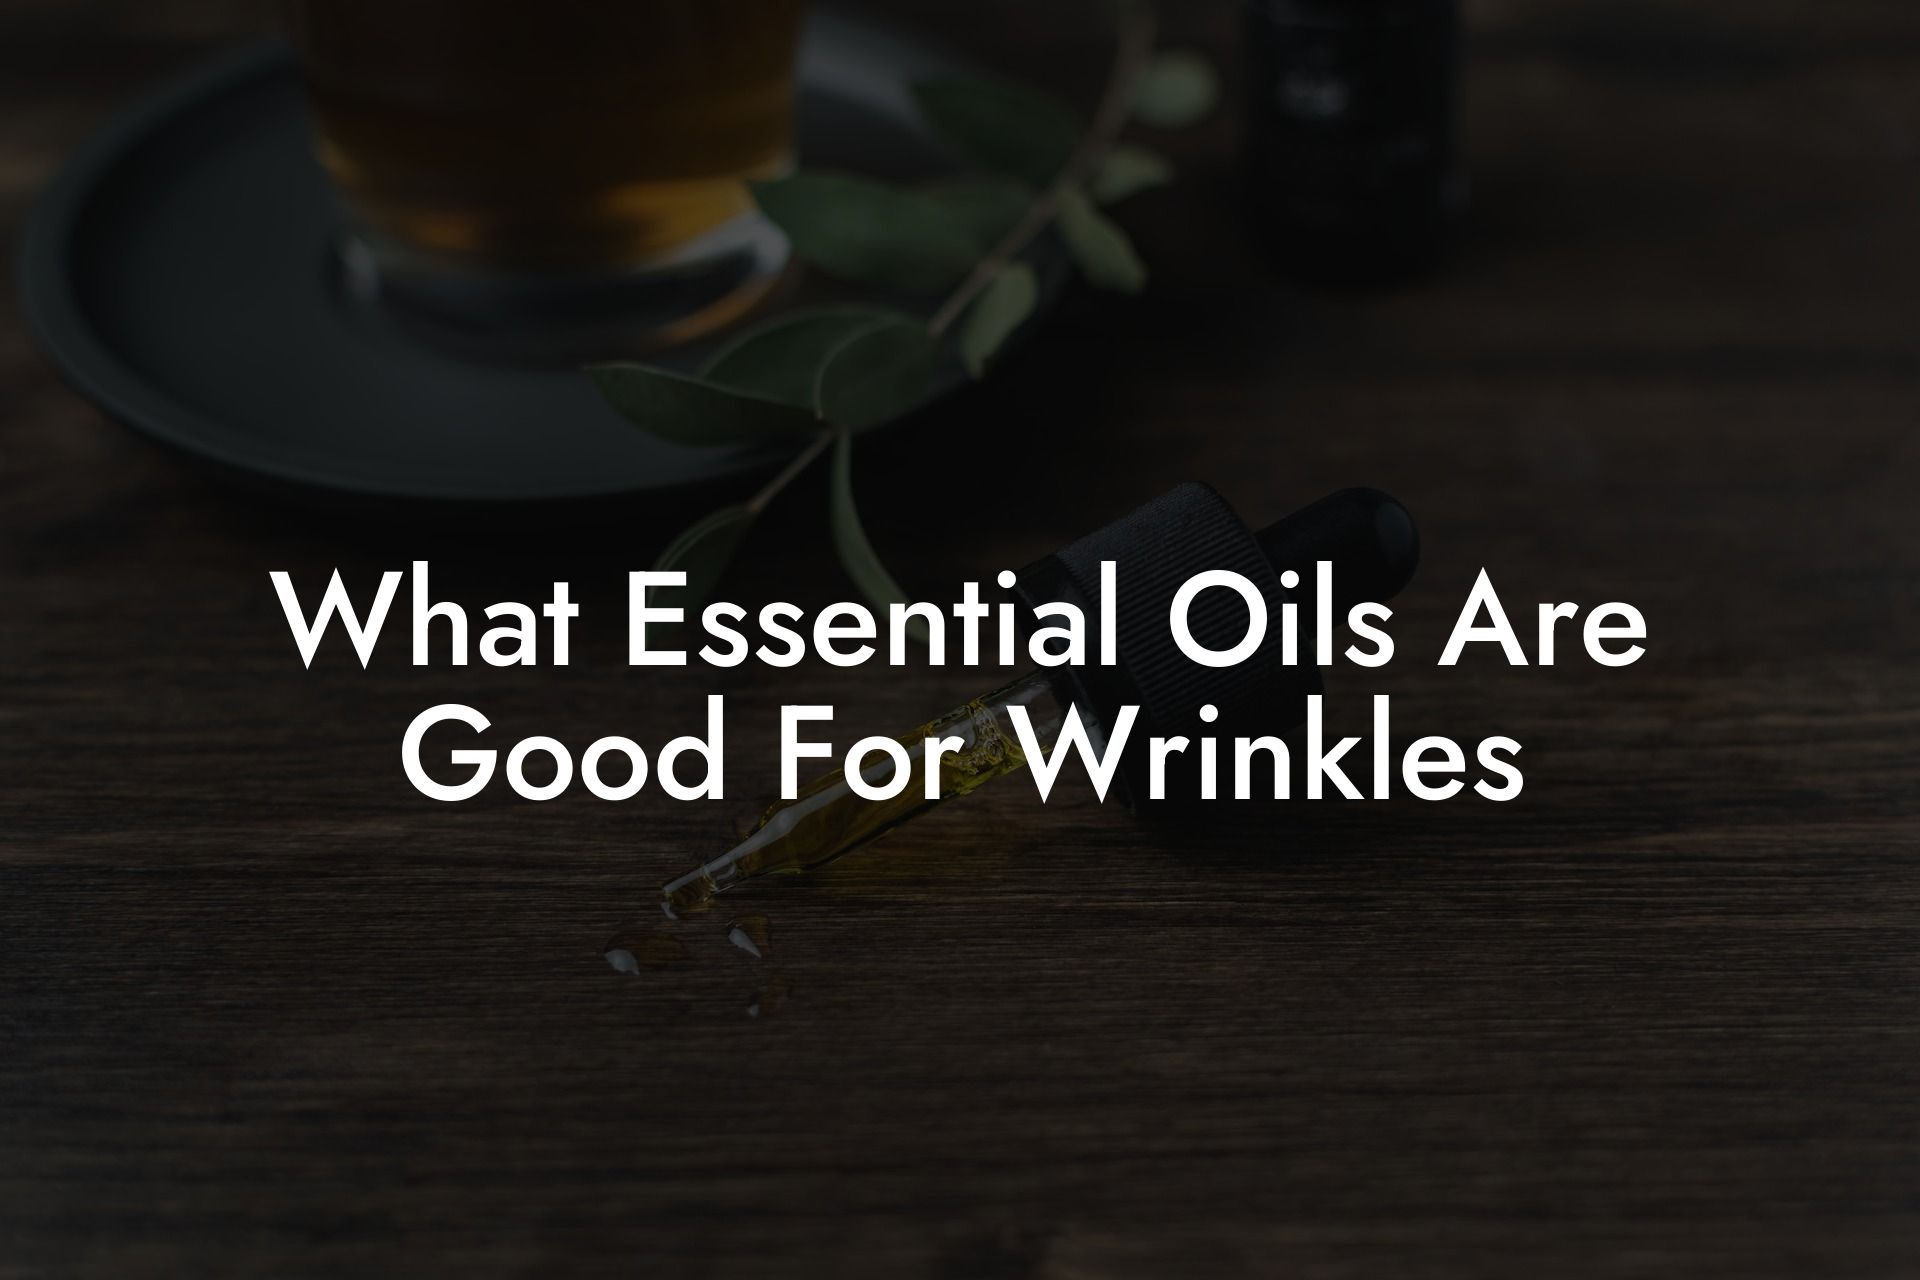 What Essential Oils Are Good For Wrinkles